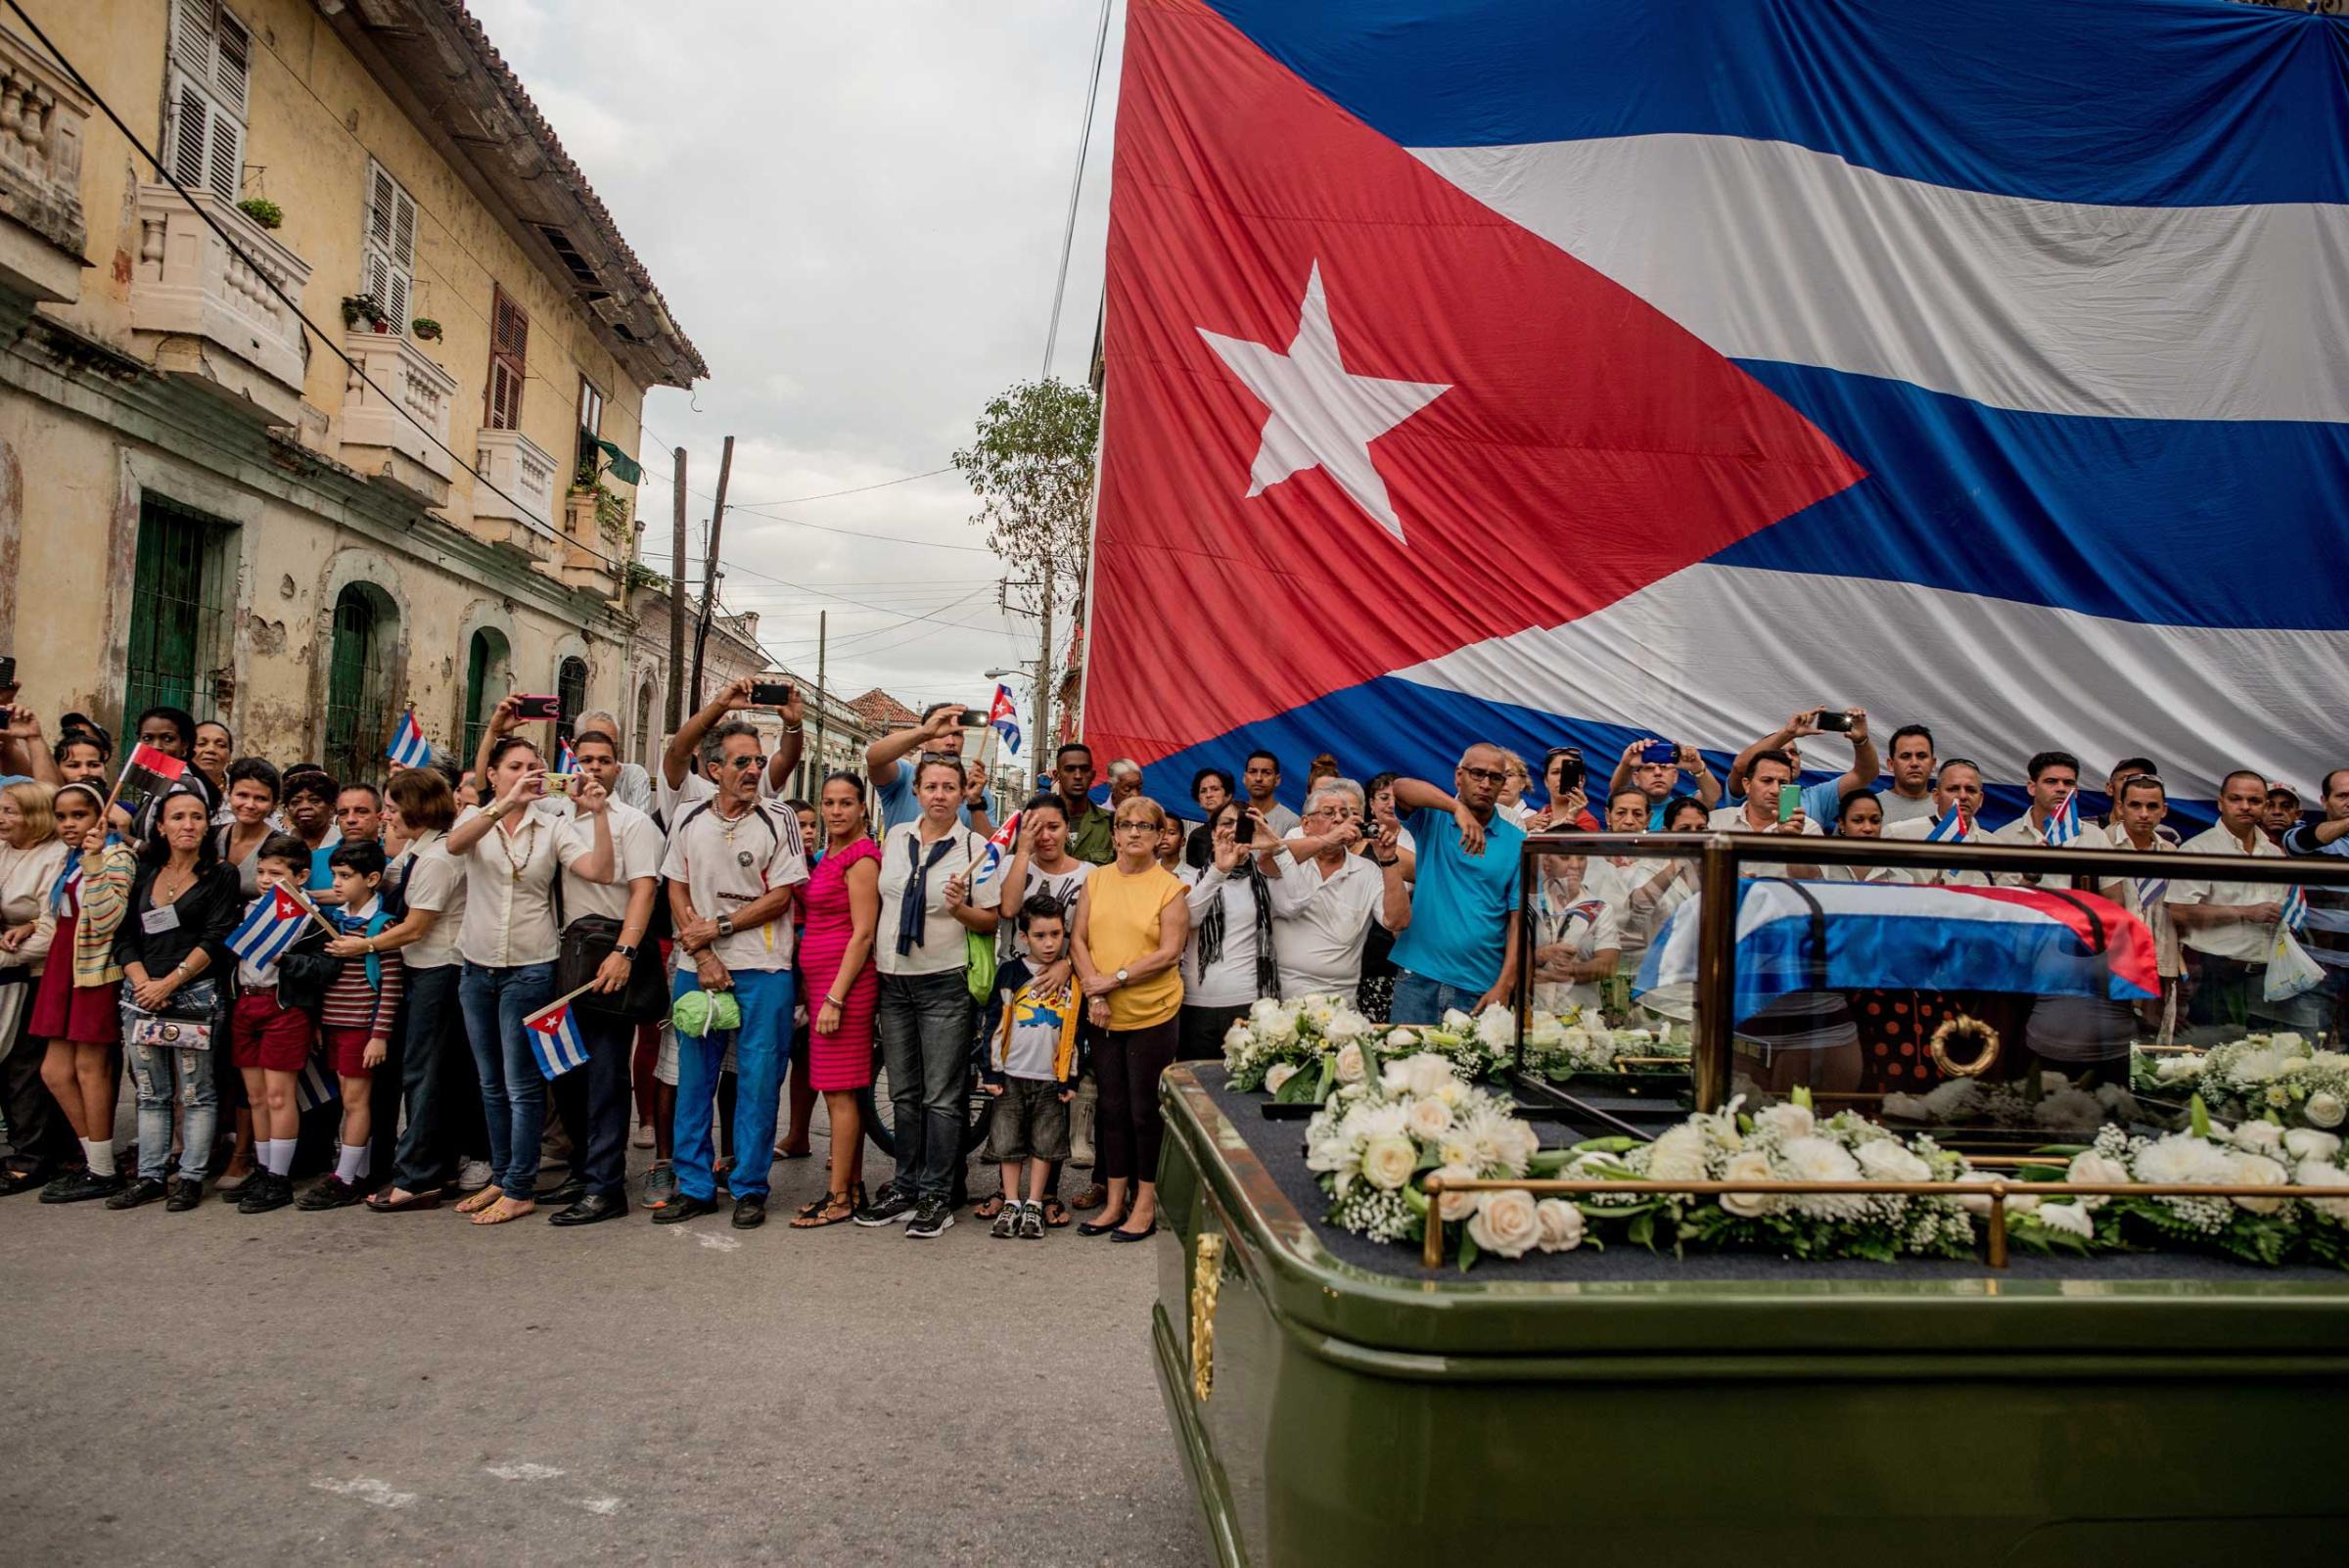 A Nation in Mourning: Images of Cuba After Fidel Castro